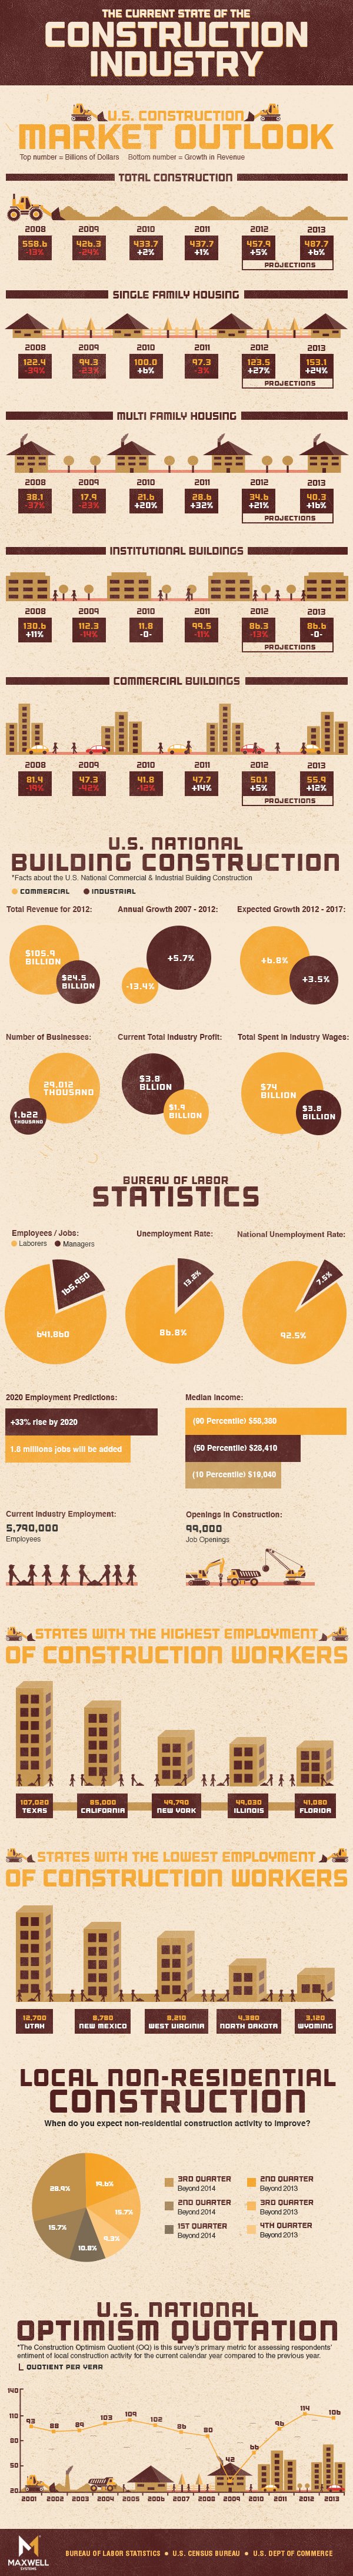 state of the construction industry infographic